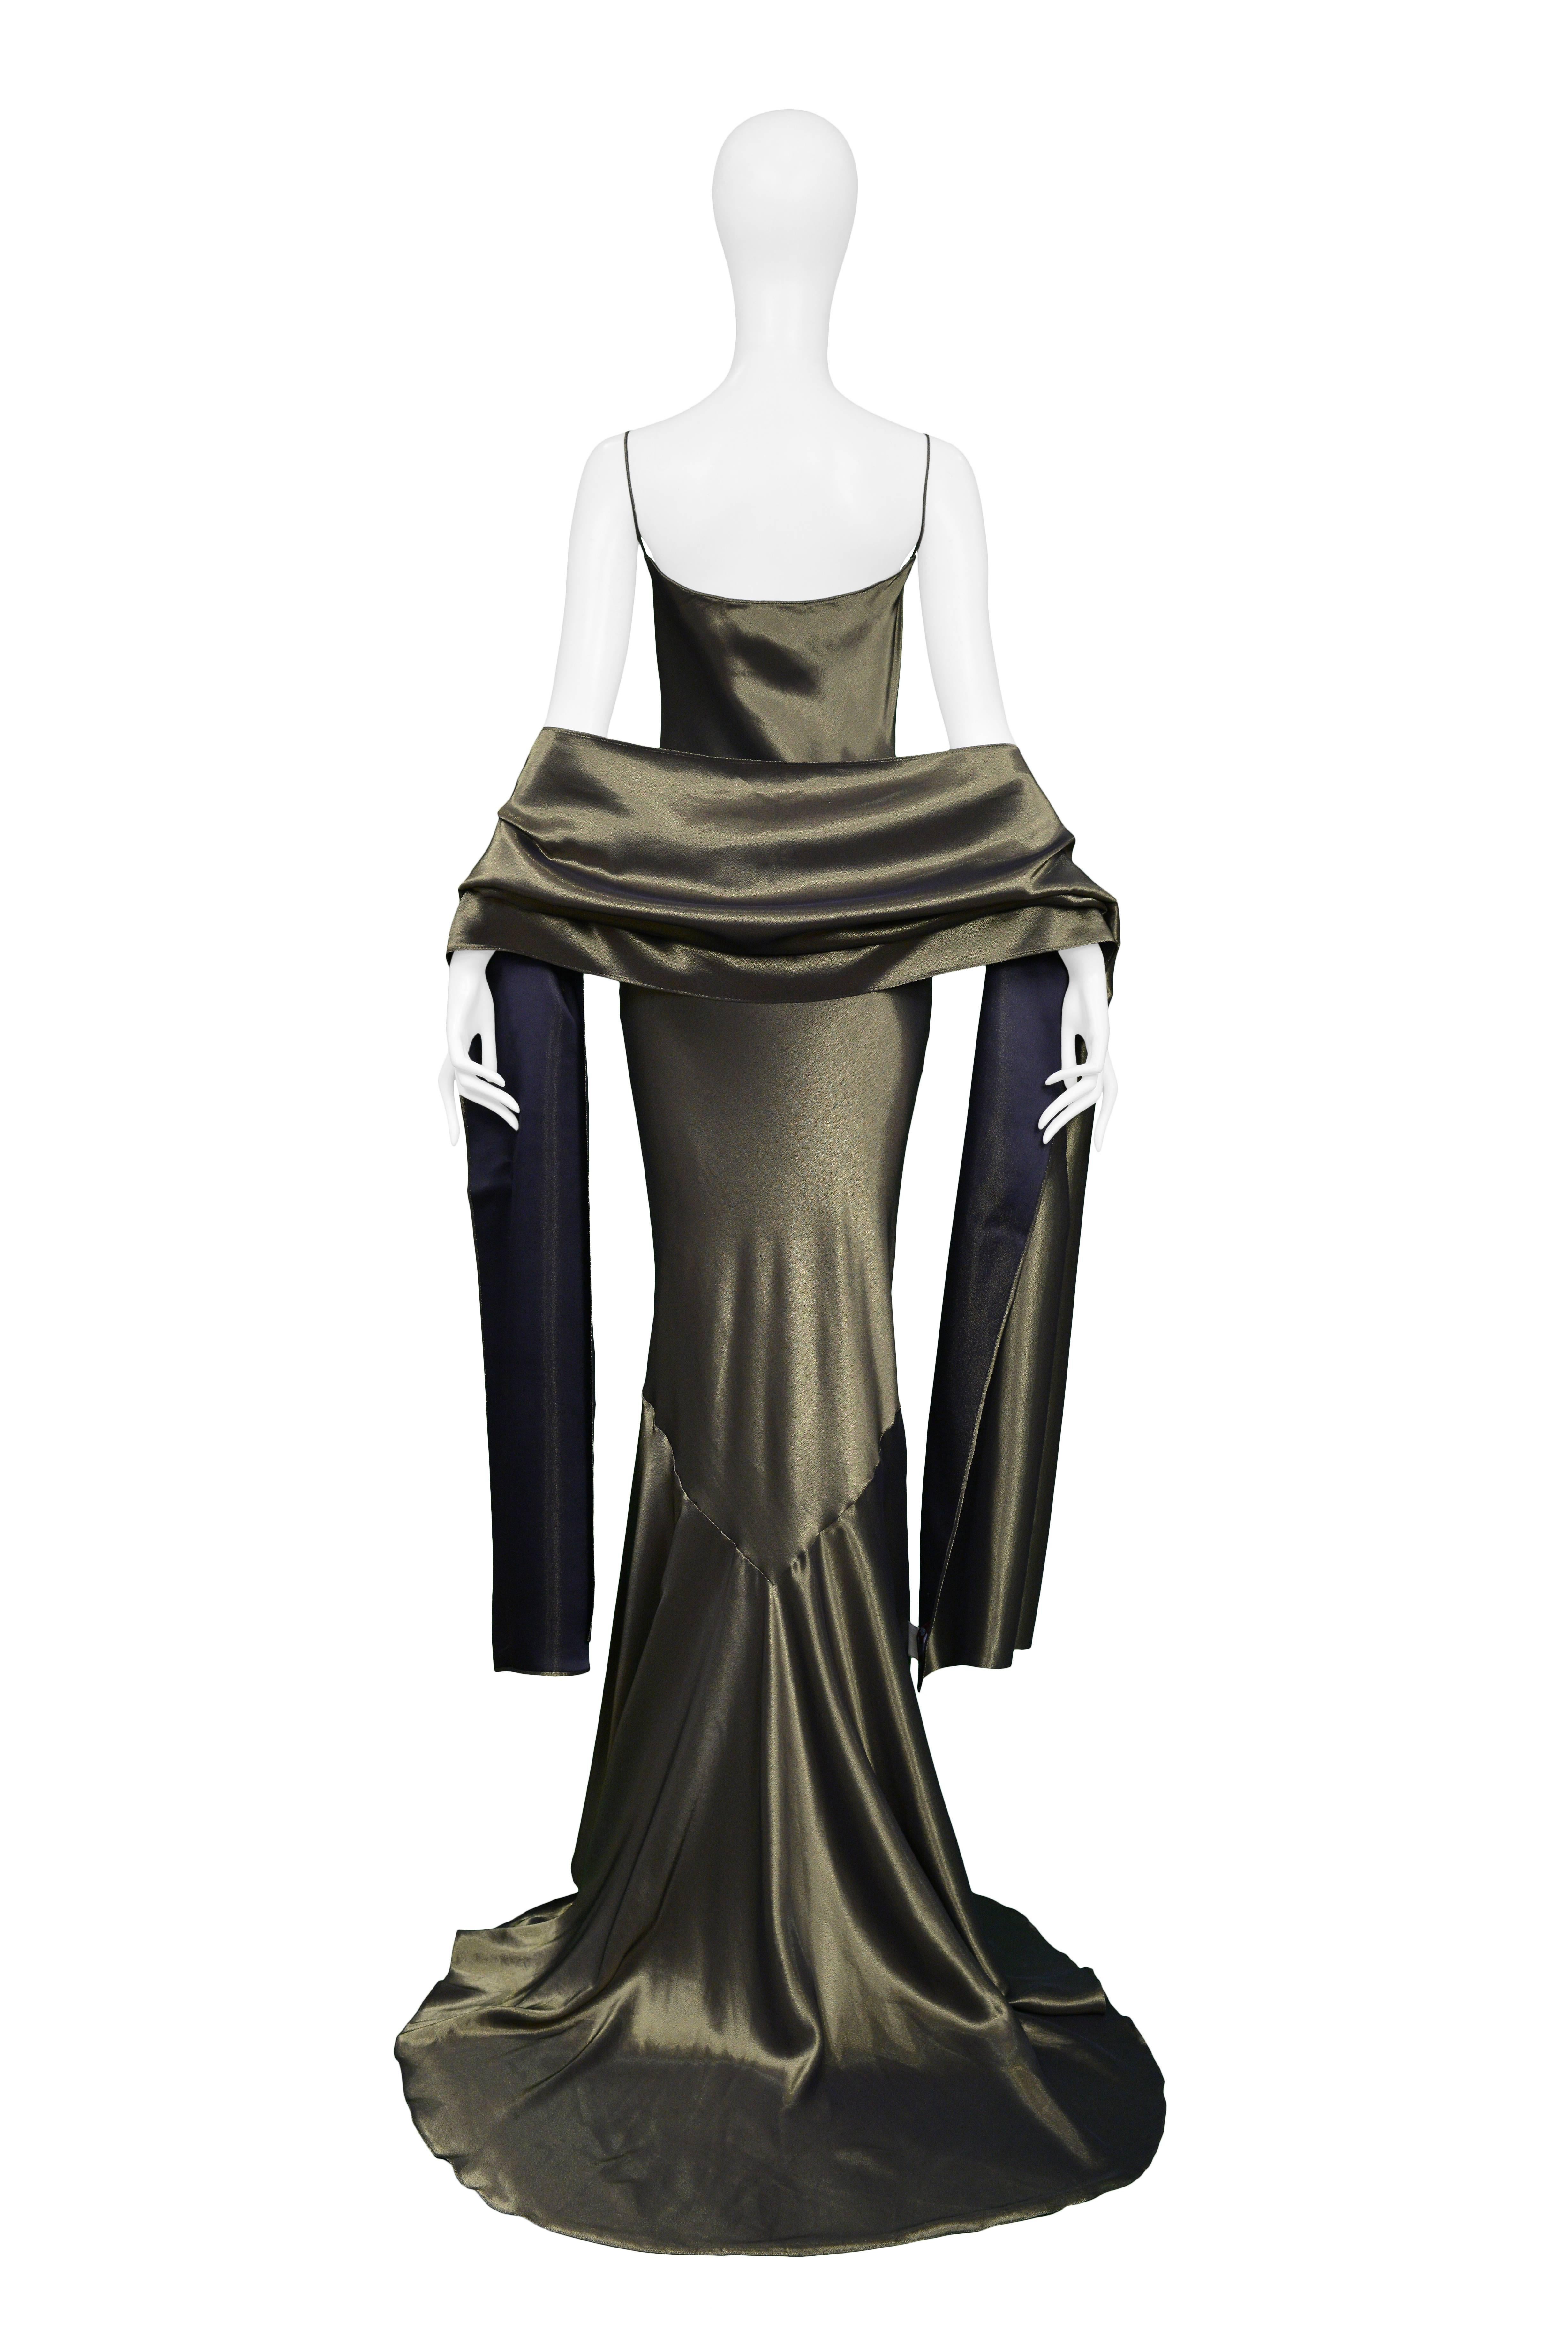 John Galliano  
Gold Slip Gown & Wrap Ensemble 1997

Condition : Excellent Vintage Condition
Vintage John Galliano liquid gold lamé slip gown with matching shawl. The gown features spaghetti straps and a fishtail train. Collection Autumn / Winter